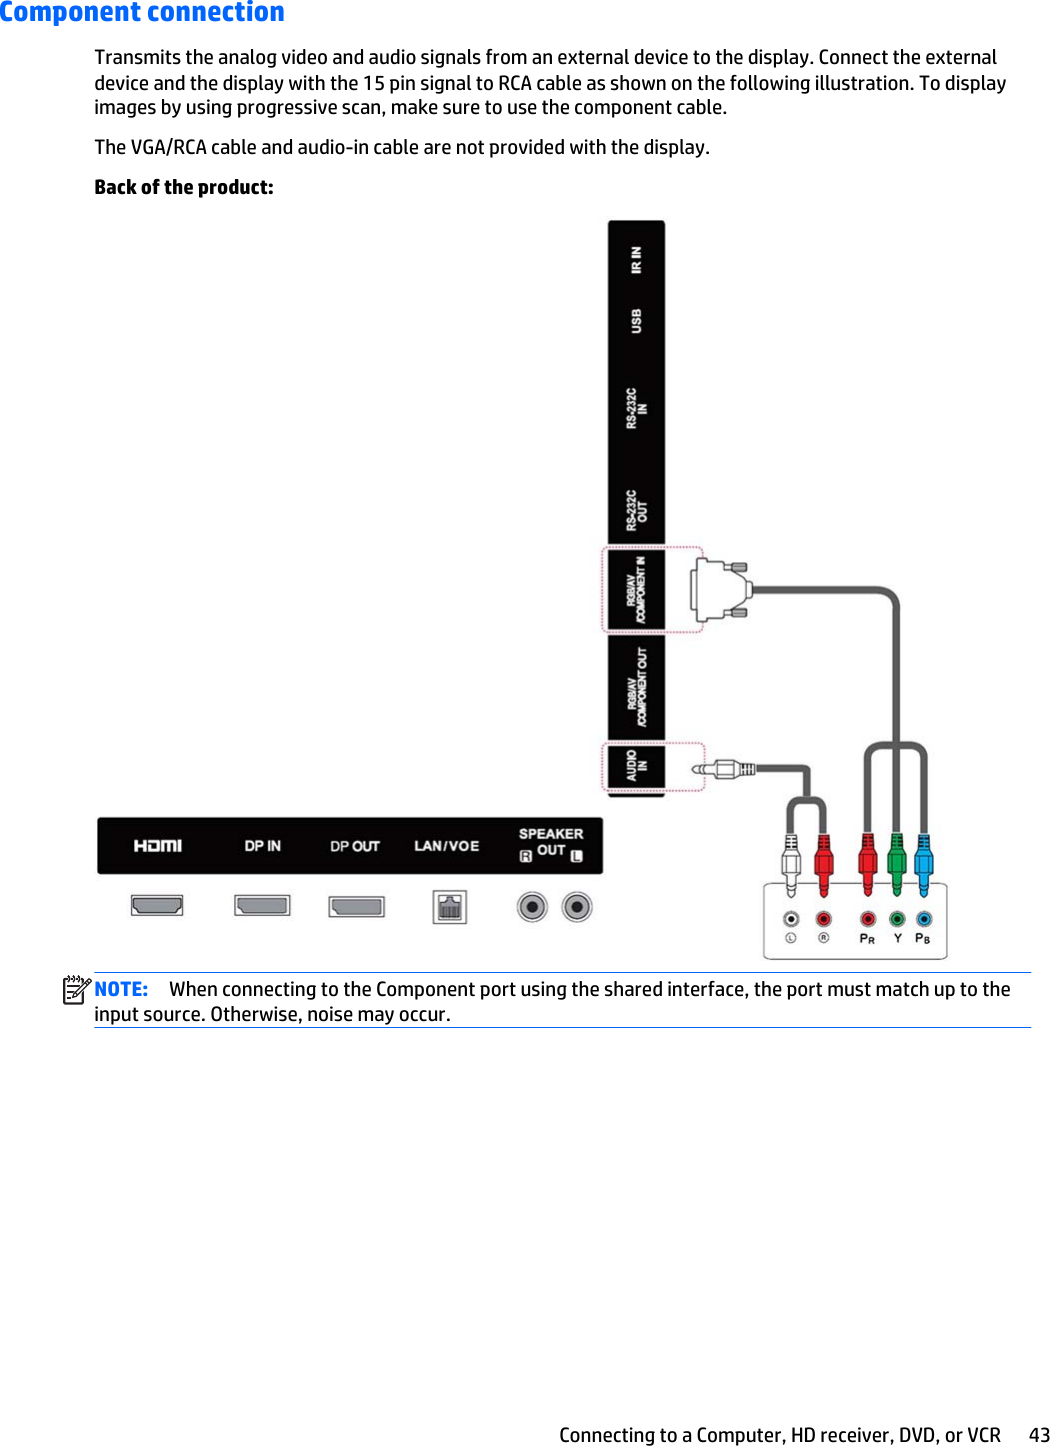 Component connectionTransmits the analog video and audio signals from an external device to the display. Connect the externaldevice and the display with the 15 pin signal to RCA cable as shown on the following illustration. To displayimages by using progressive scan, make sure to use the component cable.The VGA/RCA cable and audio-in cable are not provided with the display.Back of the product:NOTE: When connecting to the Component port using the shared interface, the port must match up to theinput source. Otherwise, noise may occur.Connecting to a Computer, HD receiver, DVD, or VCR 43